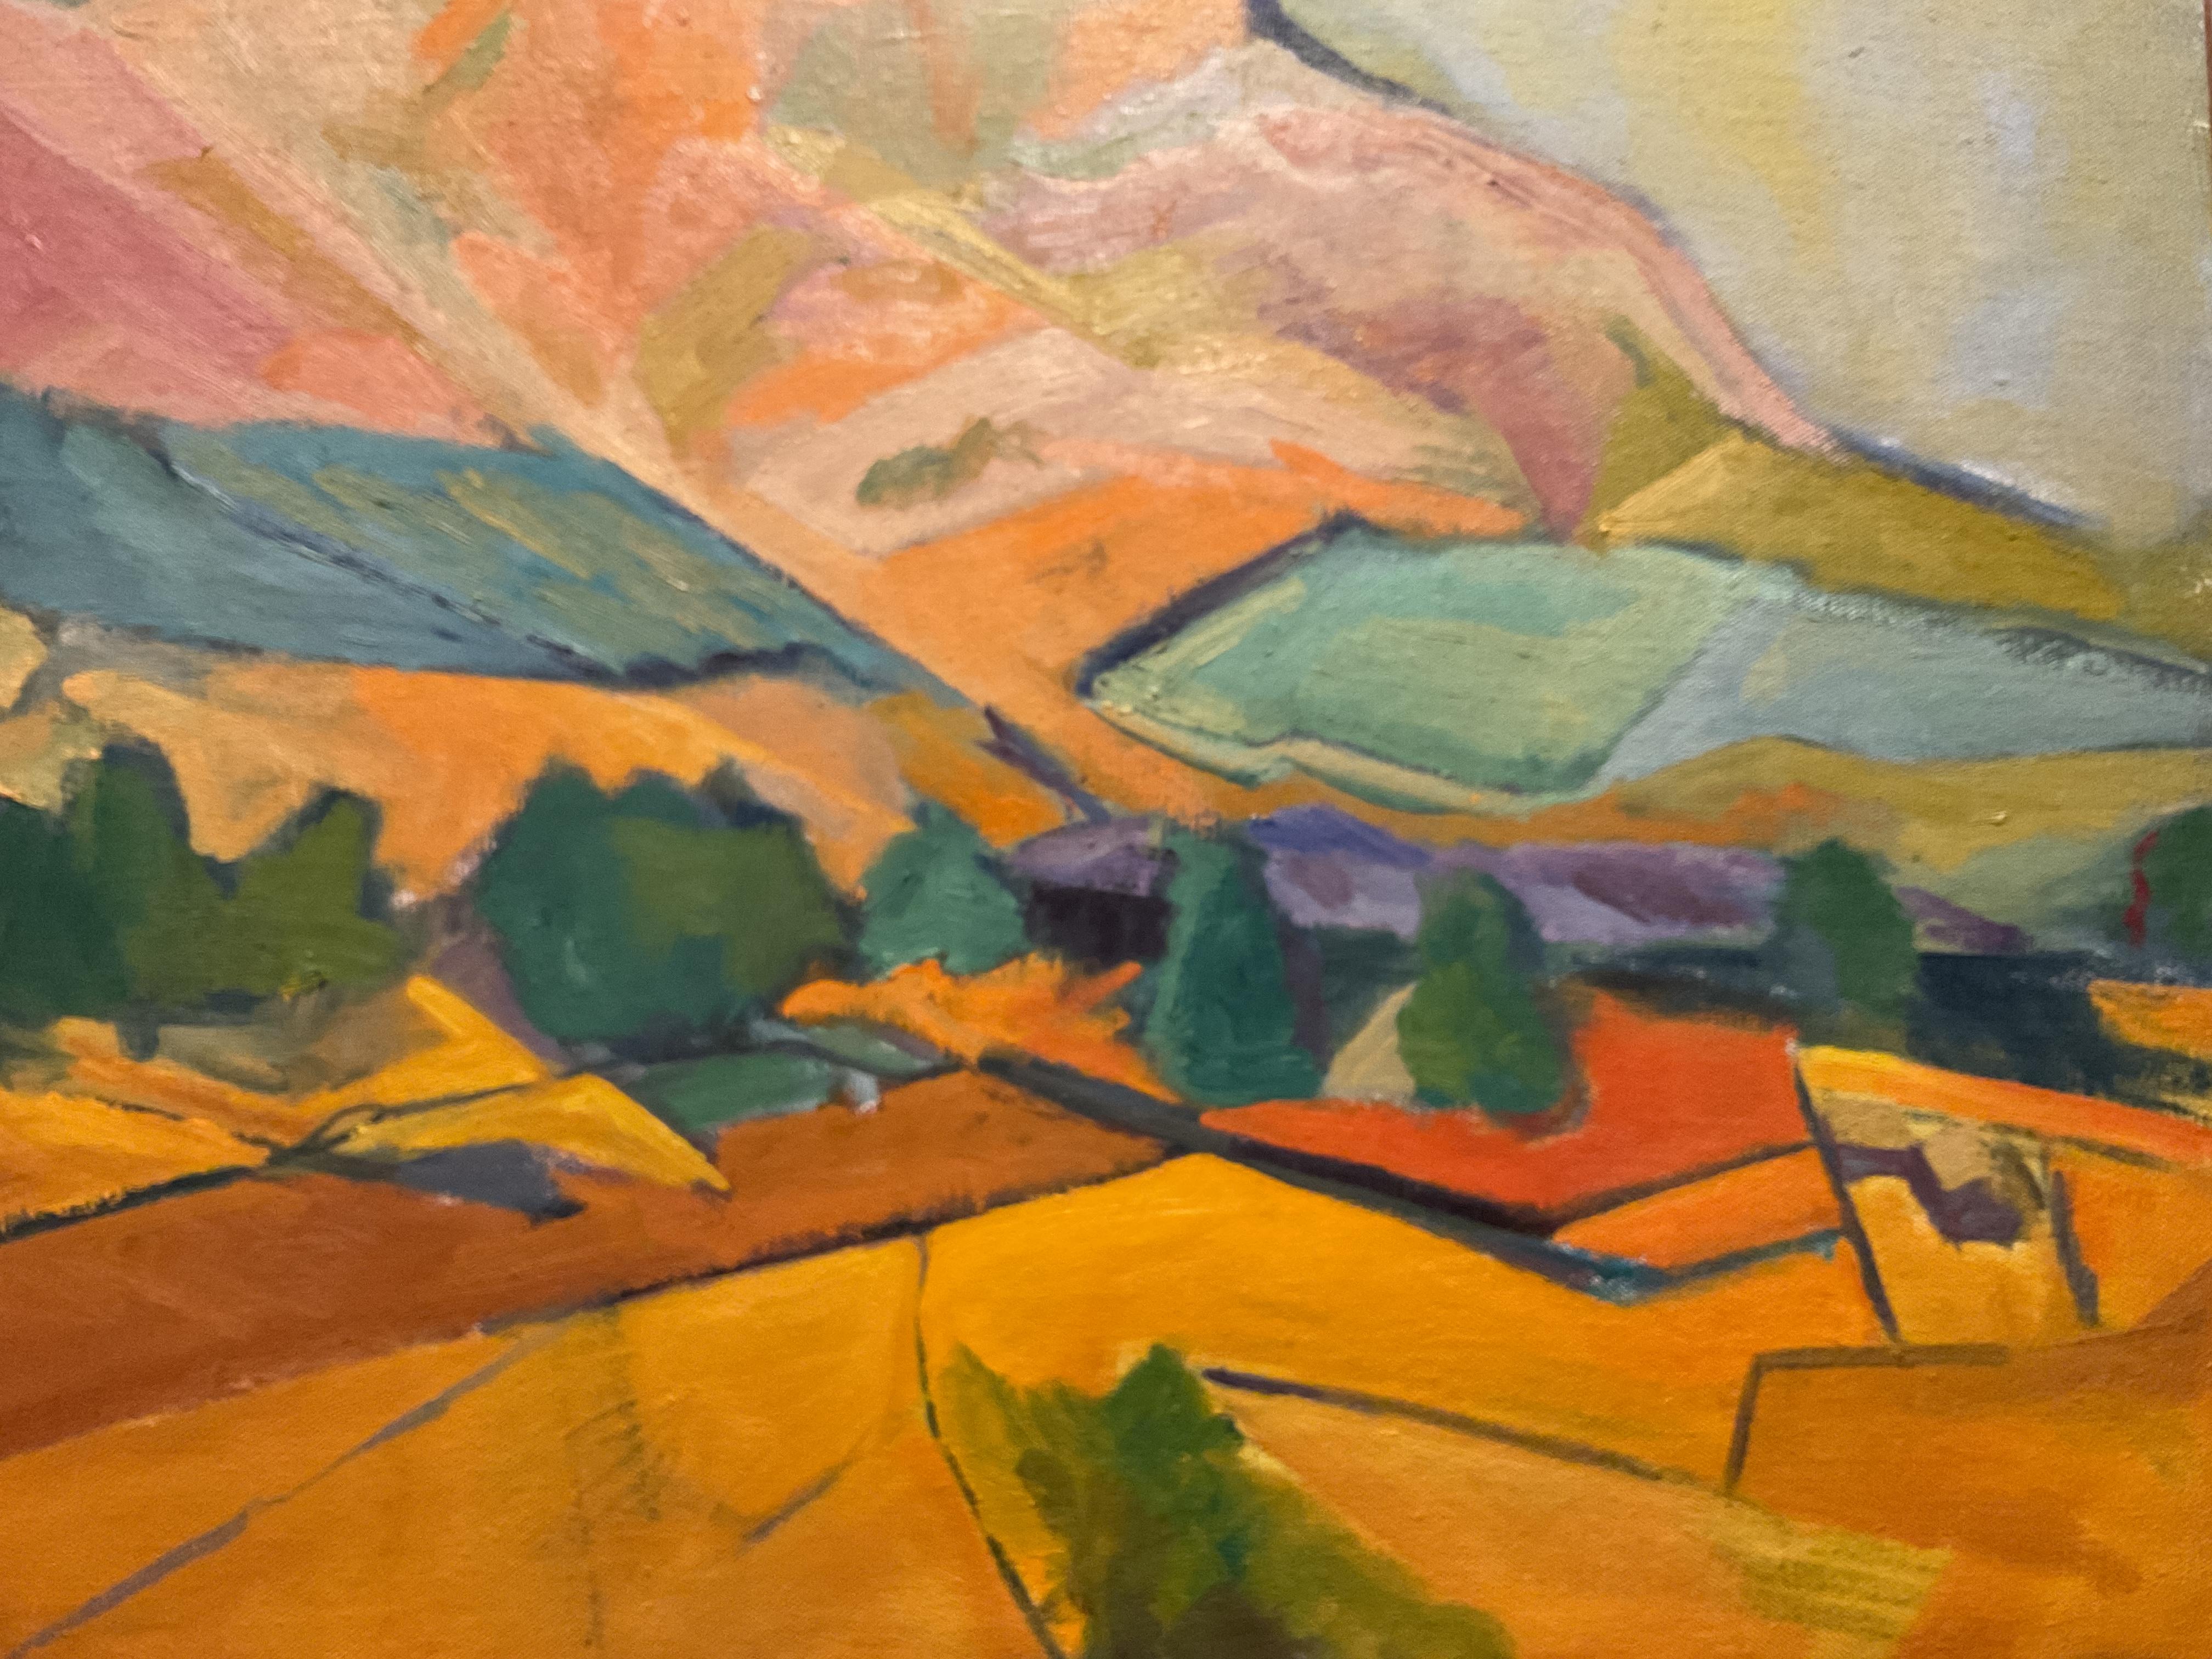 Vintage Modernist Oil on Canvas Painting - Mountainous Valley, dated 1981 - Brown Landscape Painting by John Kaufman